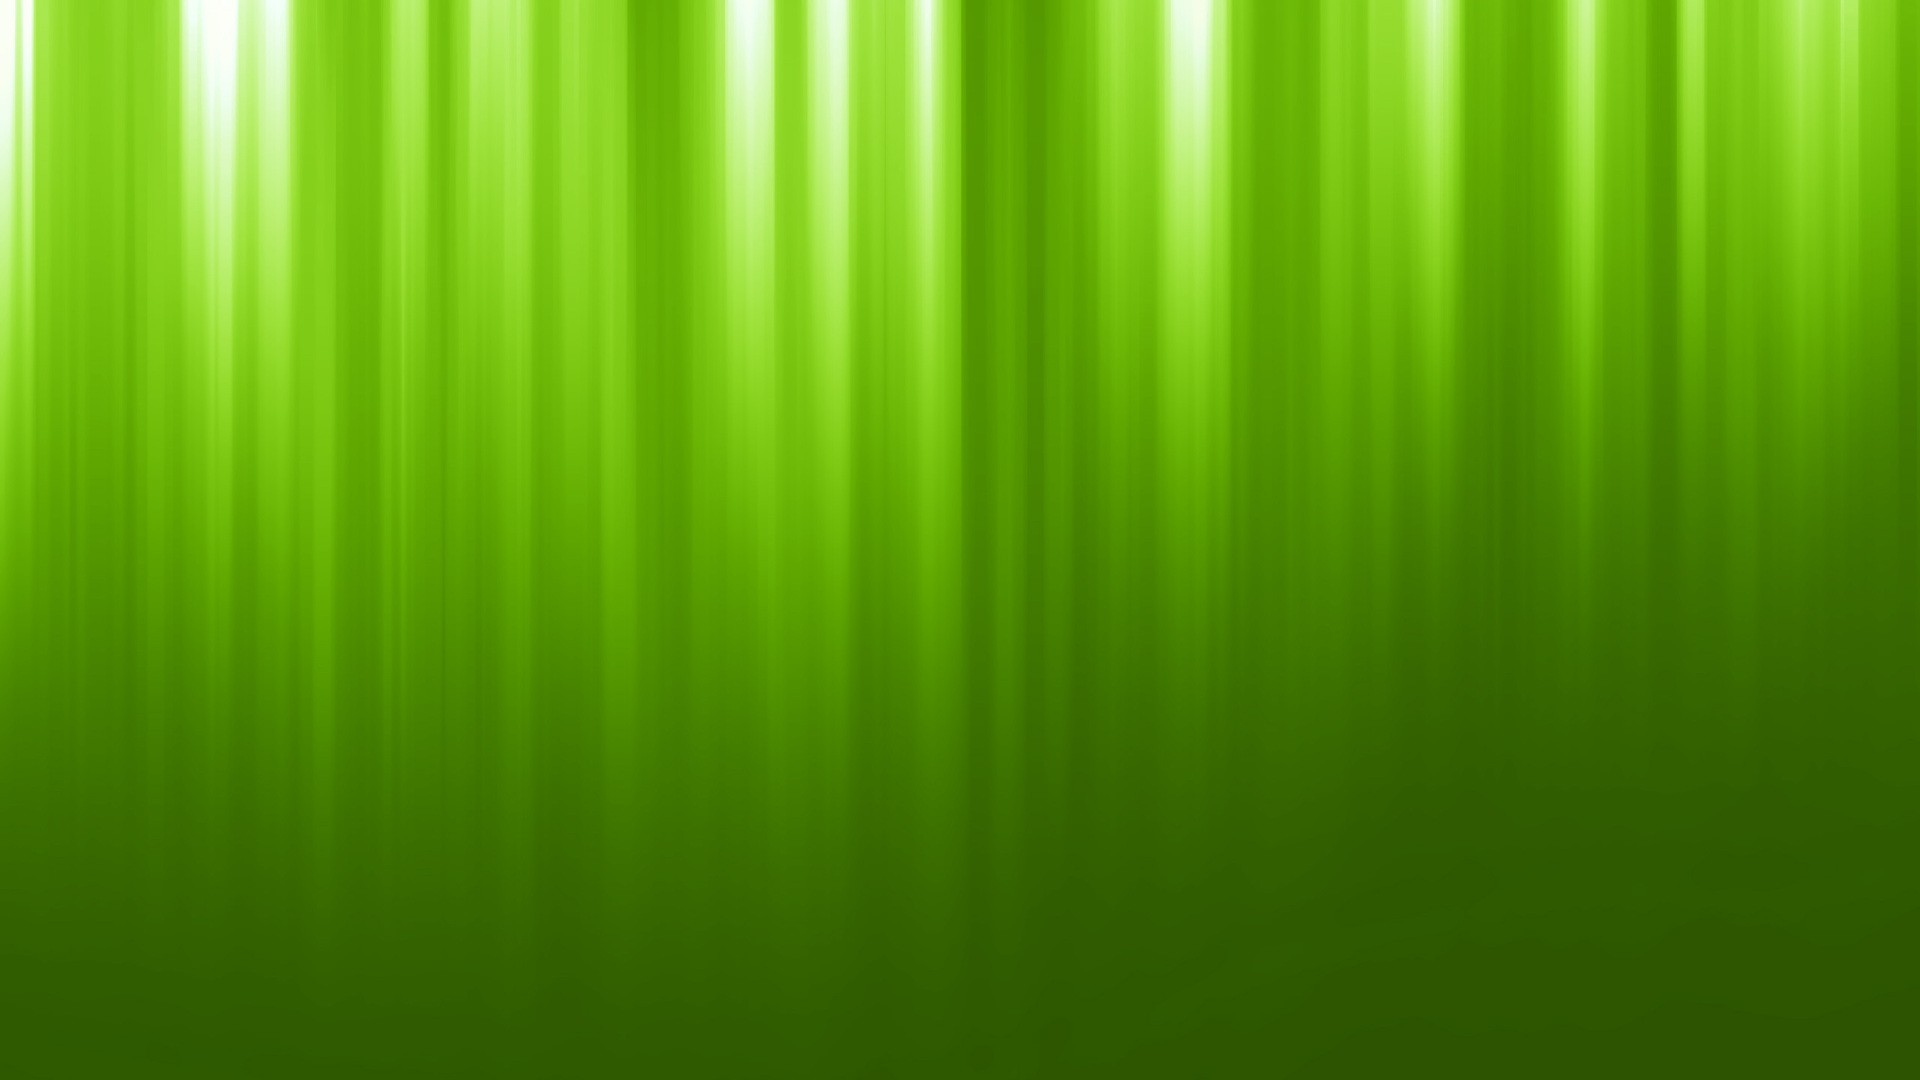 Wallpapers Computer Light Green with image resolution 1920x1080 pixel. You can make this wallpaper for your Desktop Computer Backgrounds, Mac Wallpapers, Android Lock screen or iPhone Screensavers